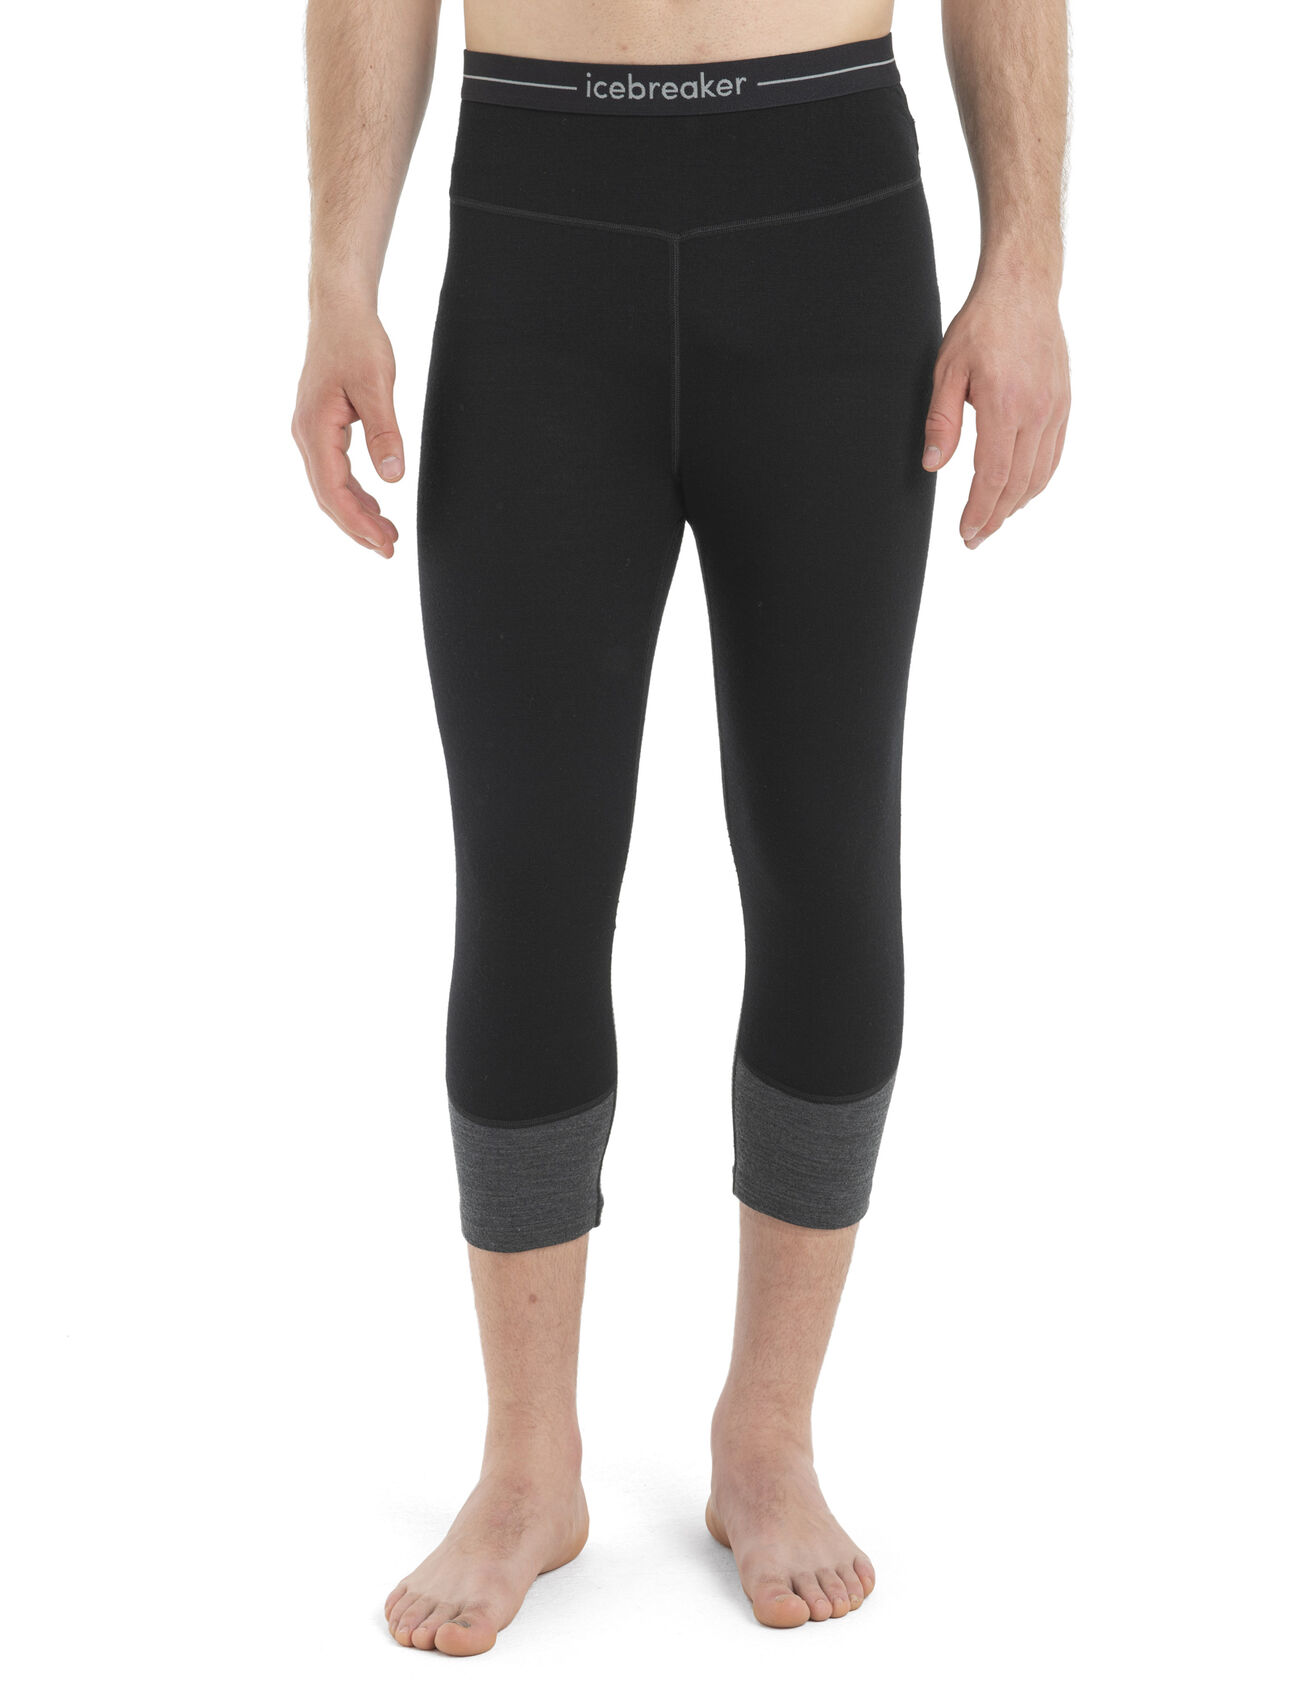 Mens 260 ZoneKnit™ Merino Thermal Legless Heavyweight merino base layer bottoms designed to help regulate temperature during high-intensity activity, the 260 ZoneKnit™ Legless feature 100% pure and natural merino wool with active ventilation.